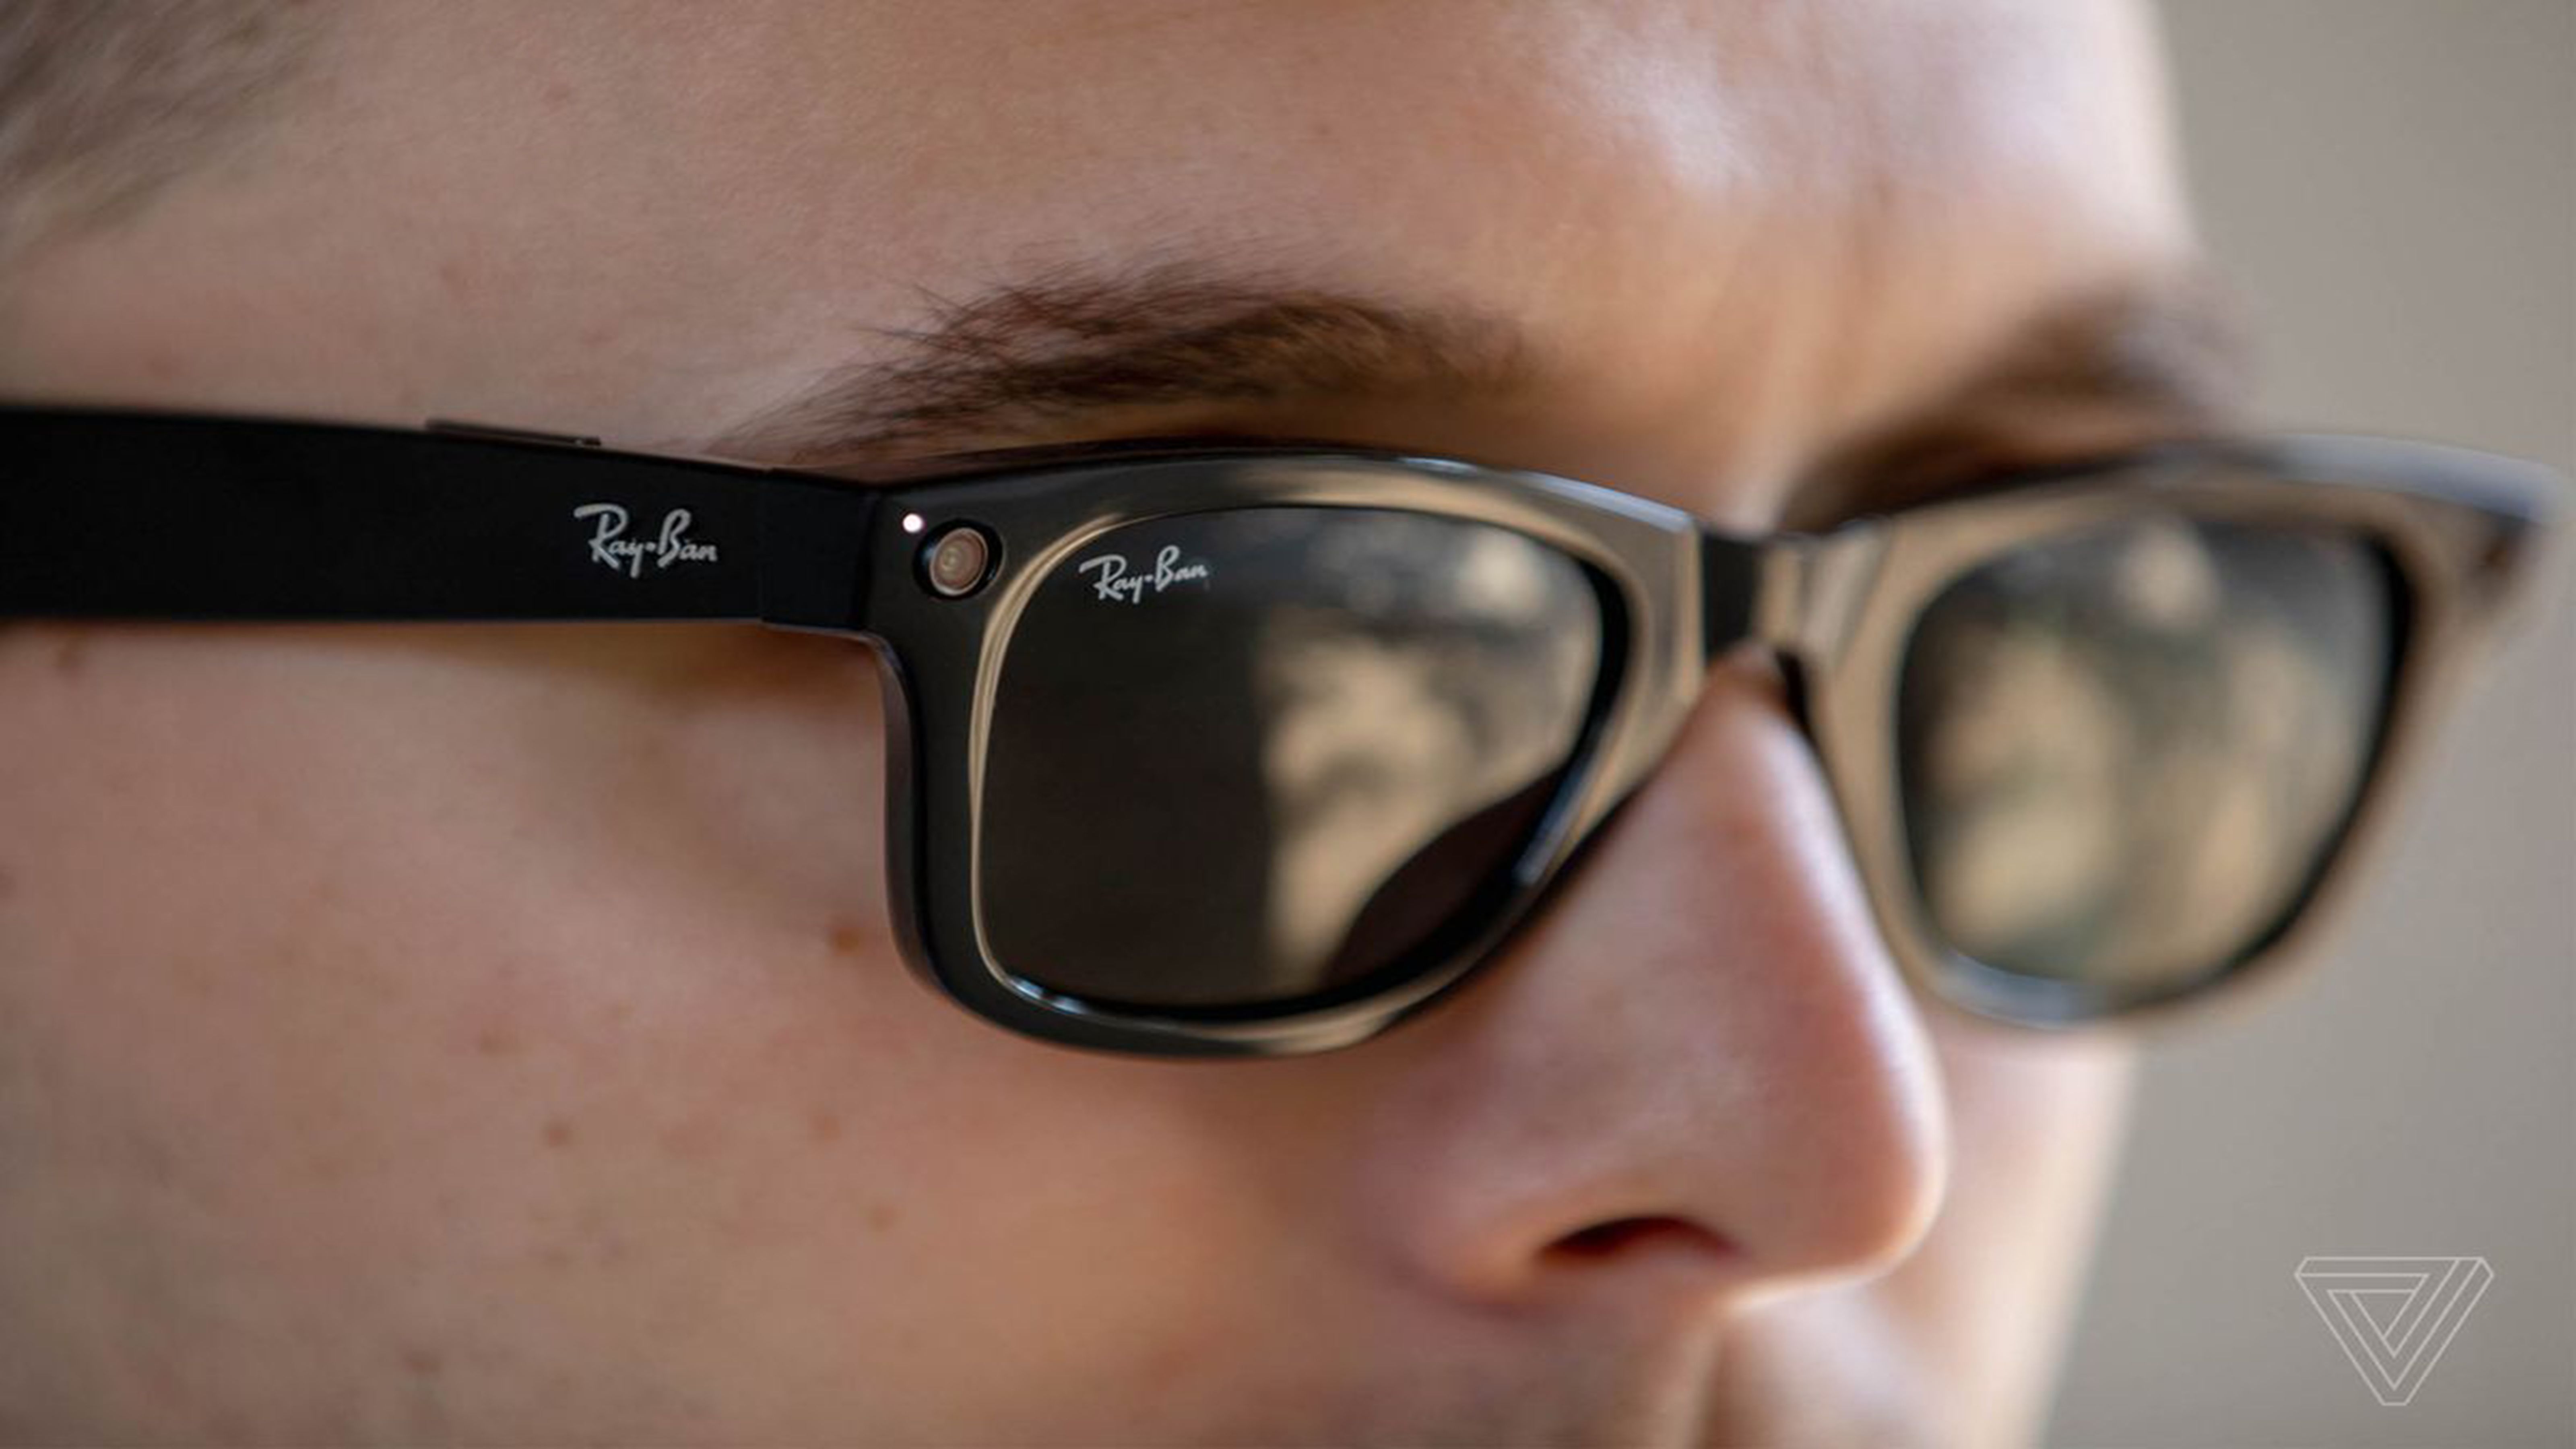 Futuristic look; Facebook, Rayban collaborate for ‘smart’ eyeglasses photo from The Verge